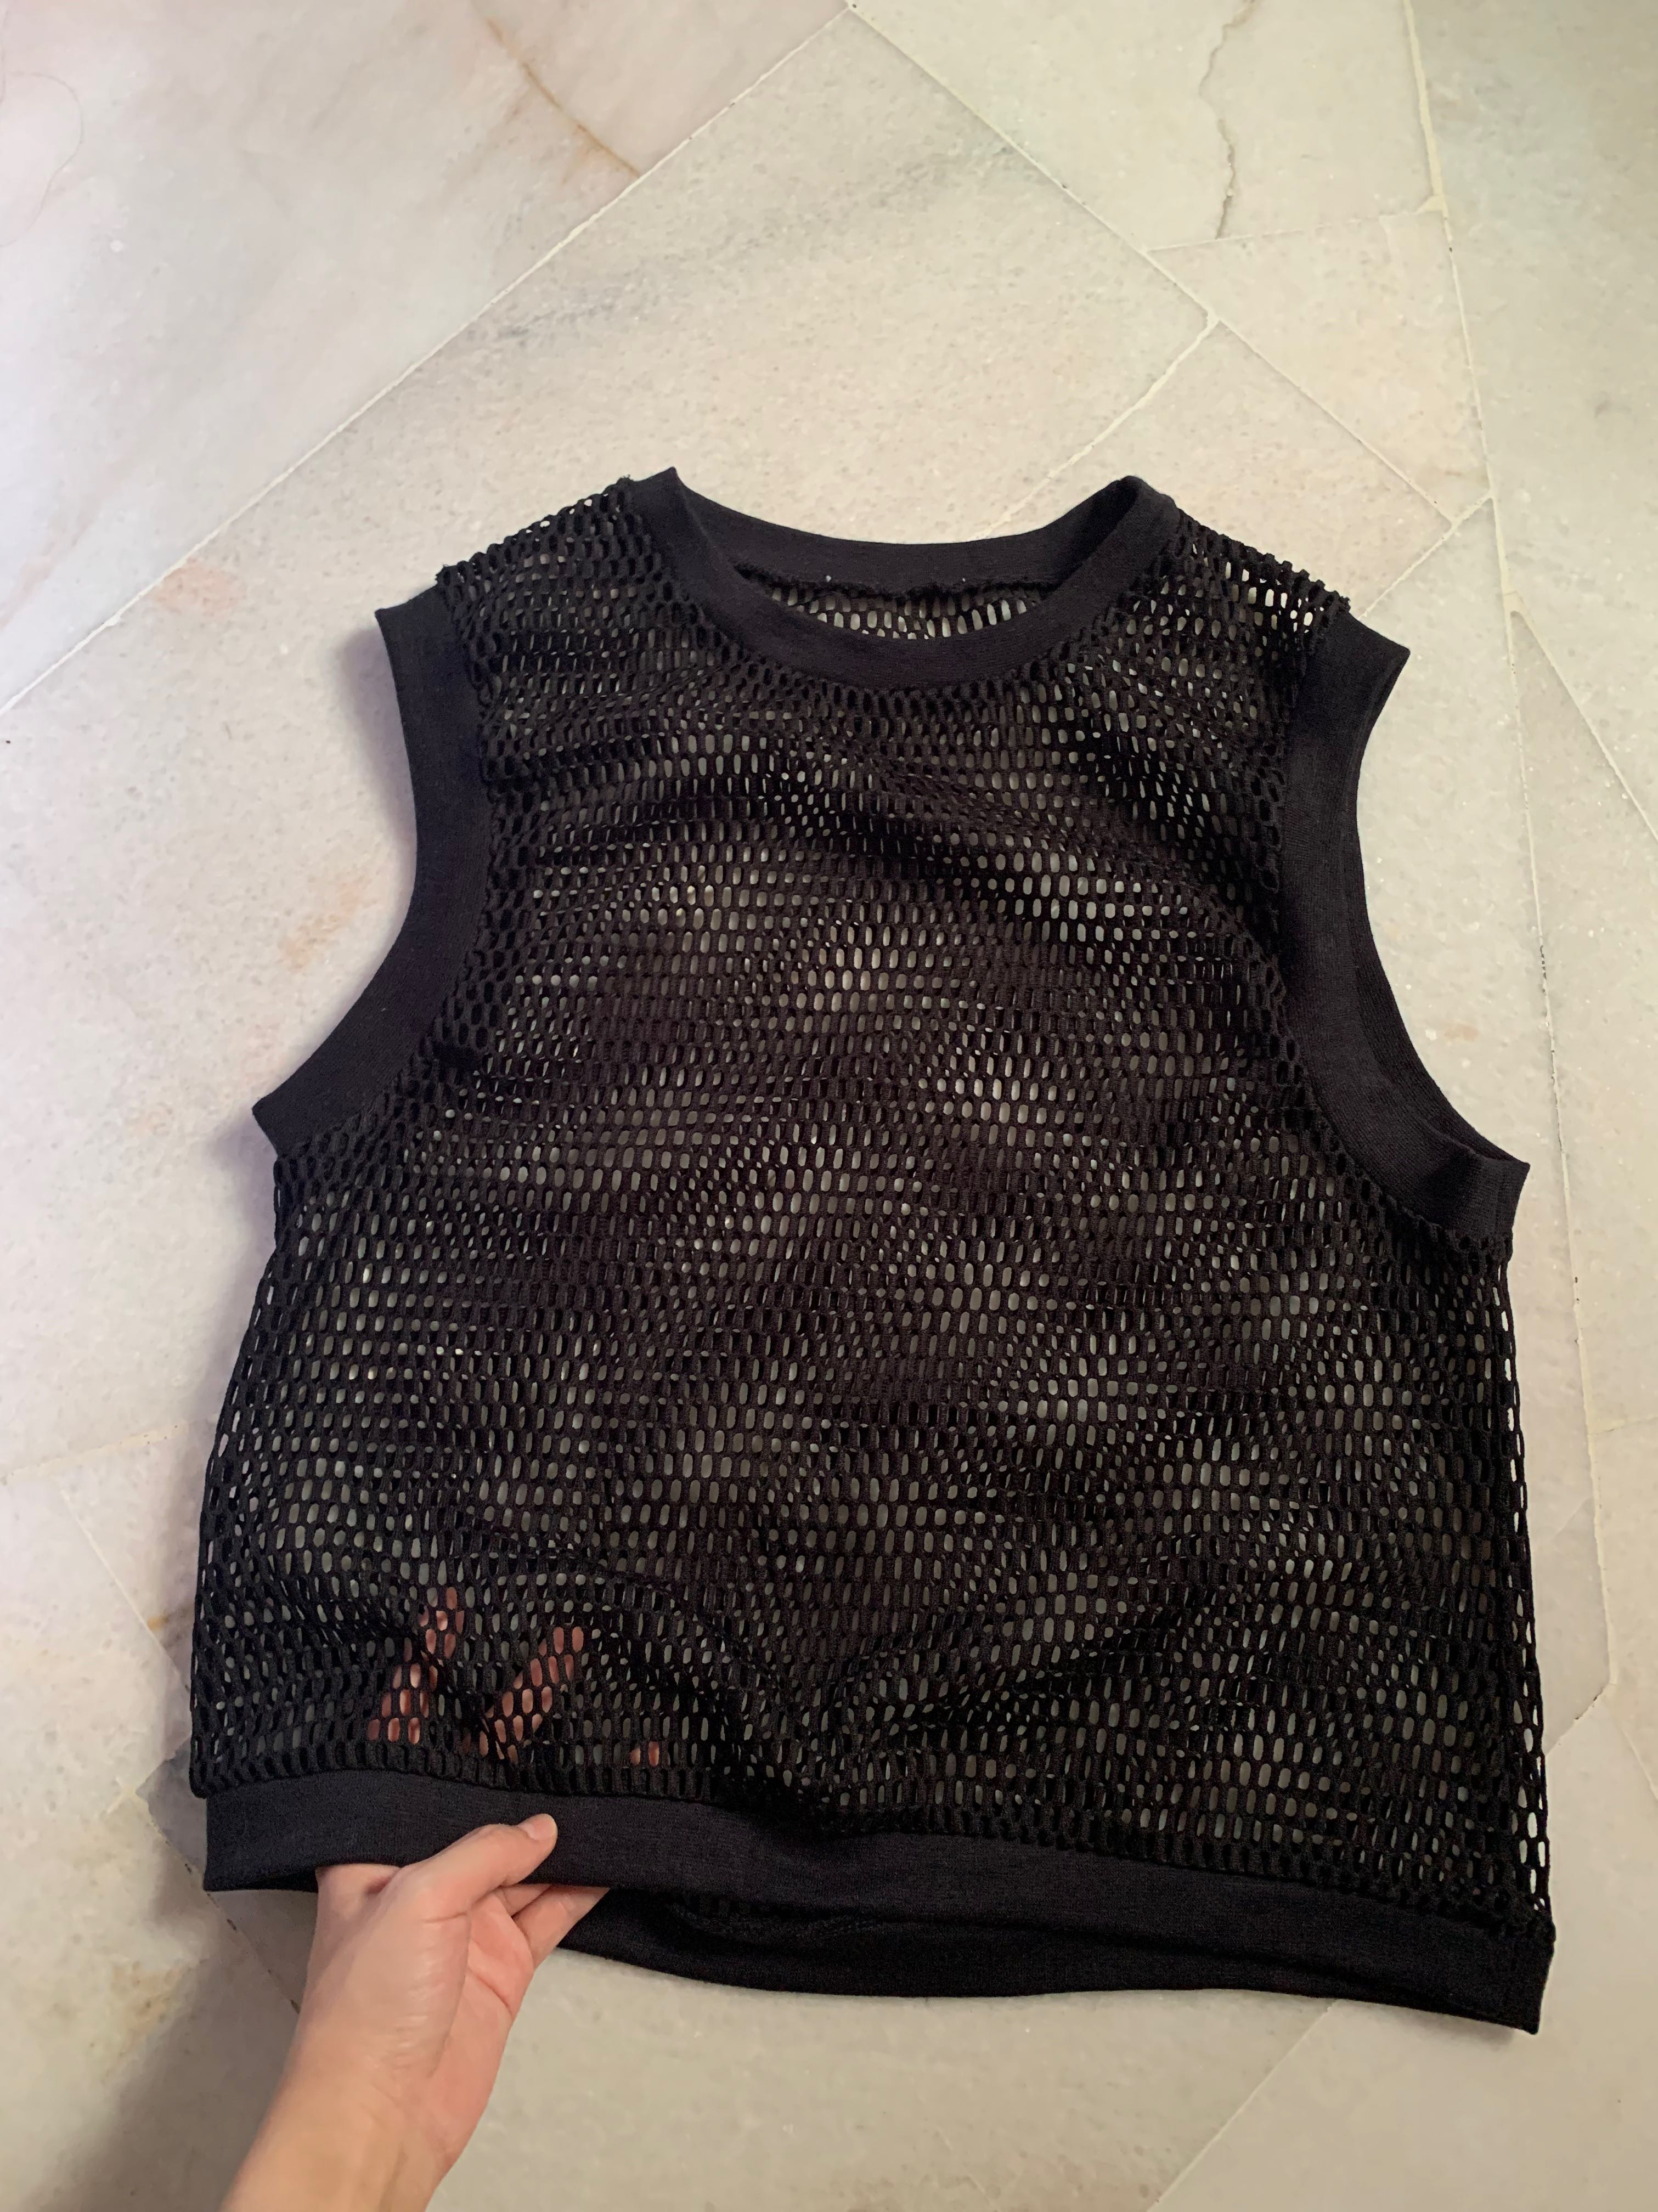 See-Through Netting Top, Women's Fashion, Tops, Other Tops on Carousell